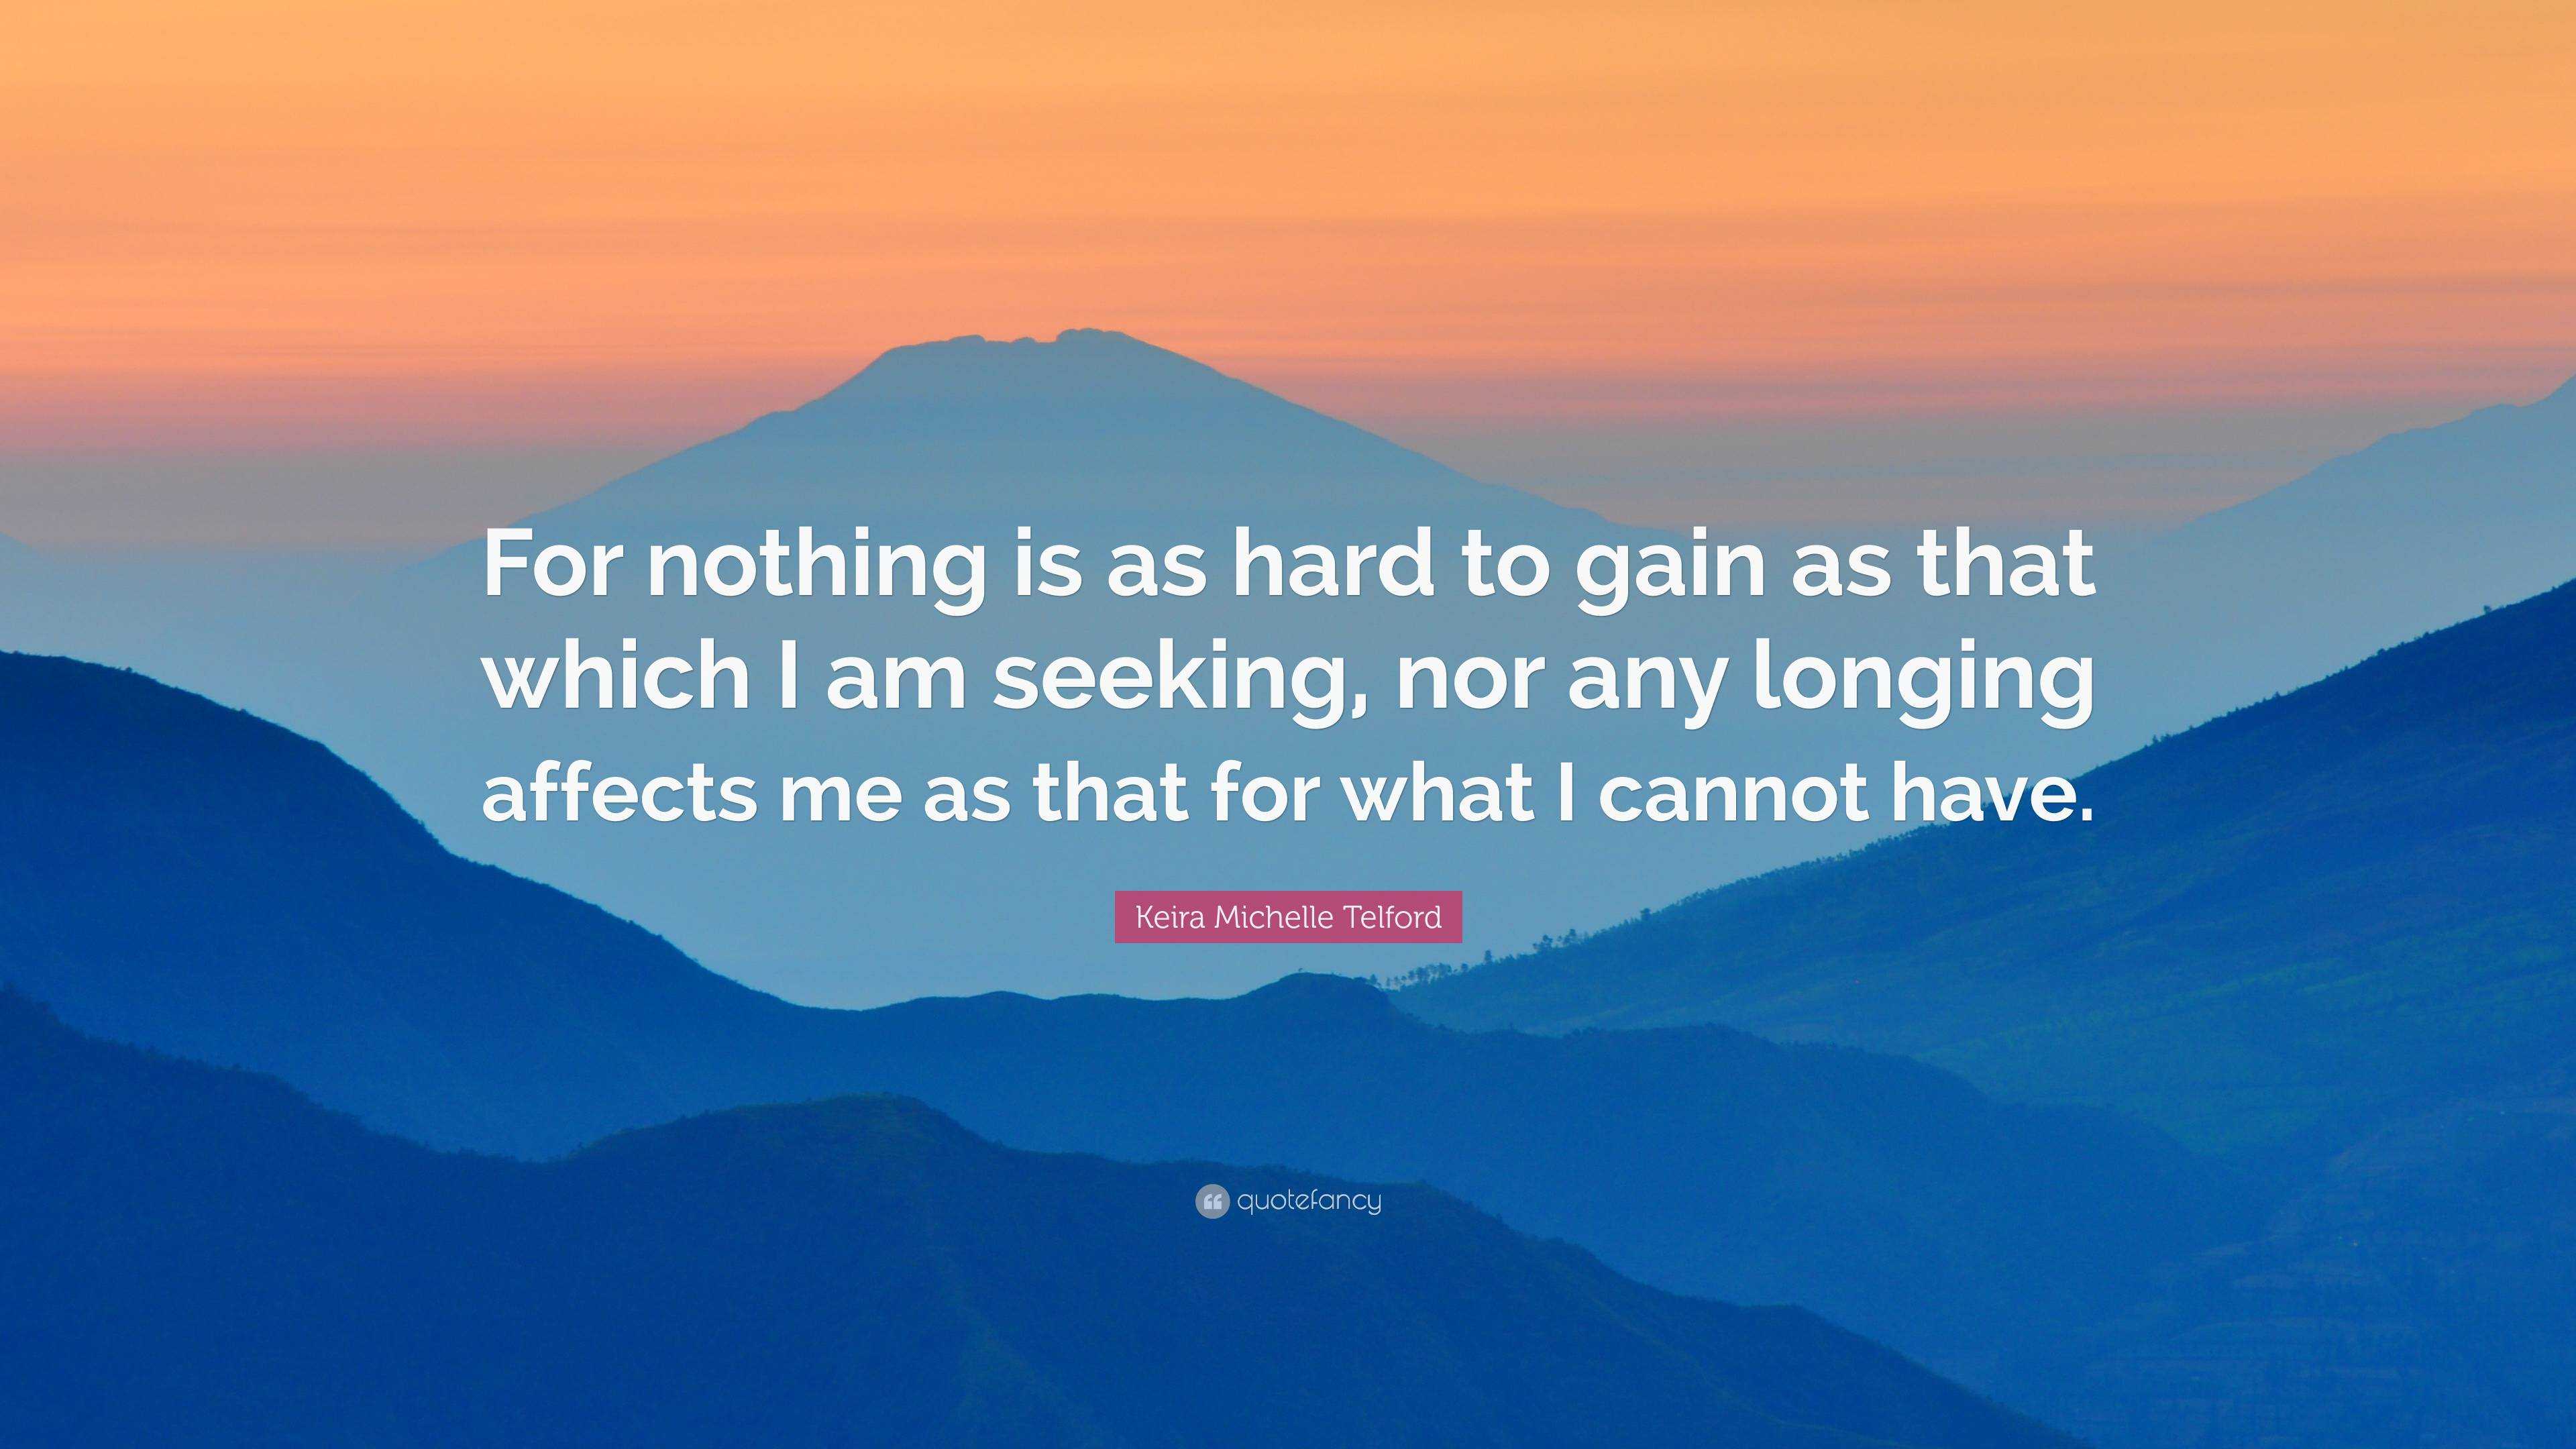 Keira Michelle Telford Quote: “For nothing is as hard to gain as that ...